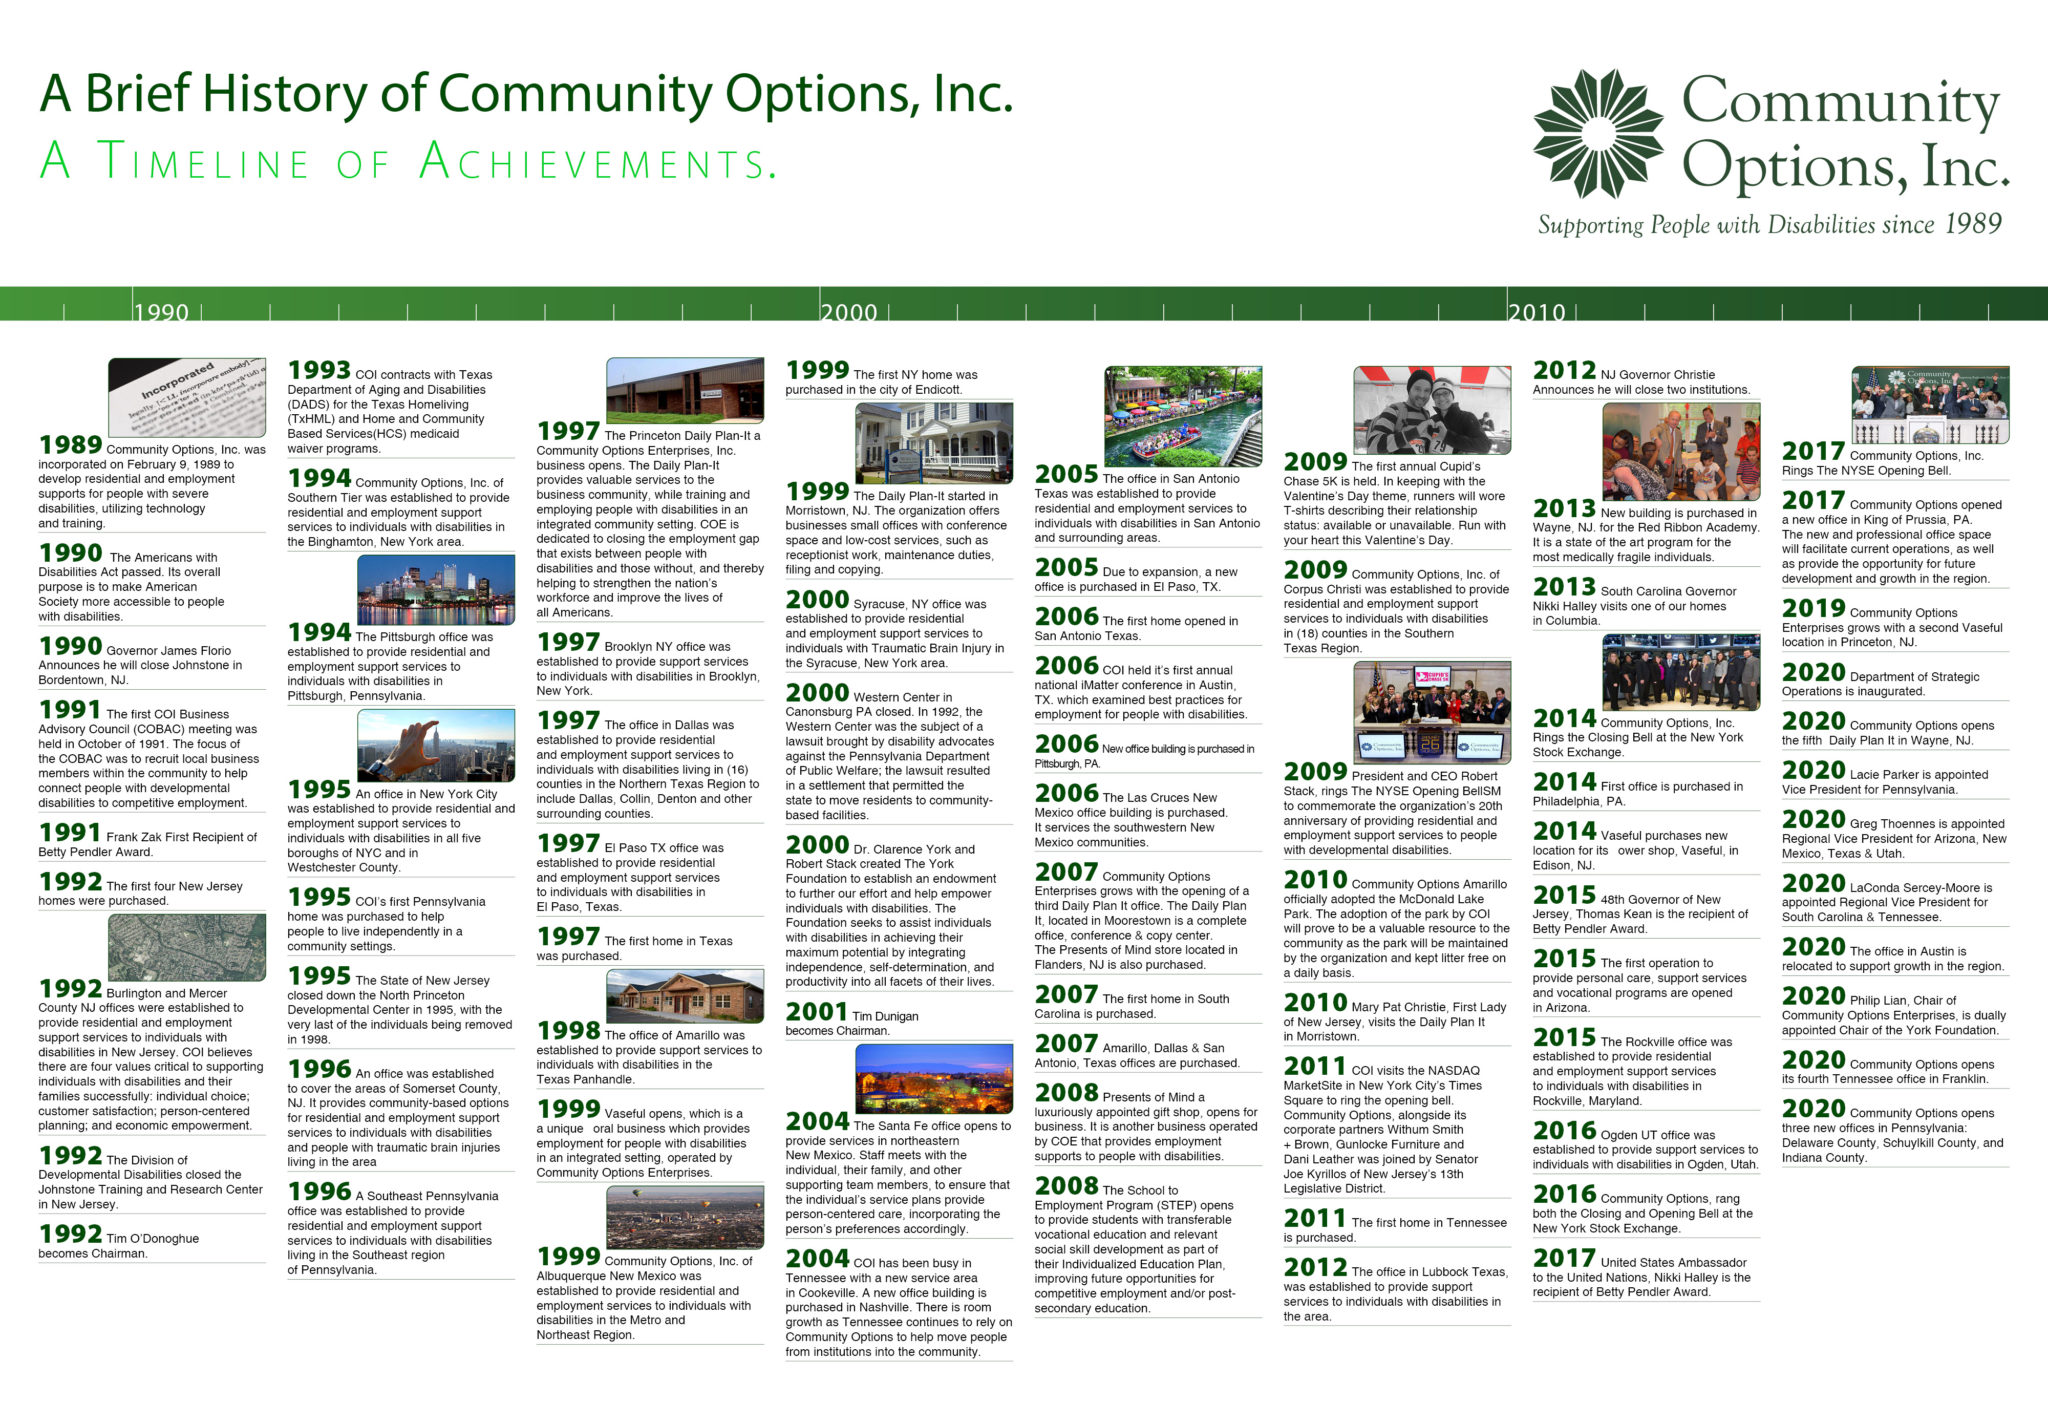 A Brief History of Community Options, Inc. A Timeline of Achievements. Revised October 2020